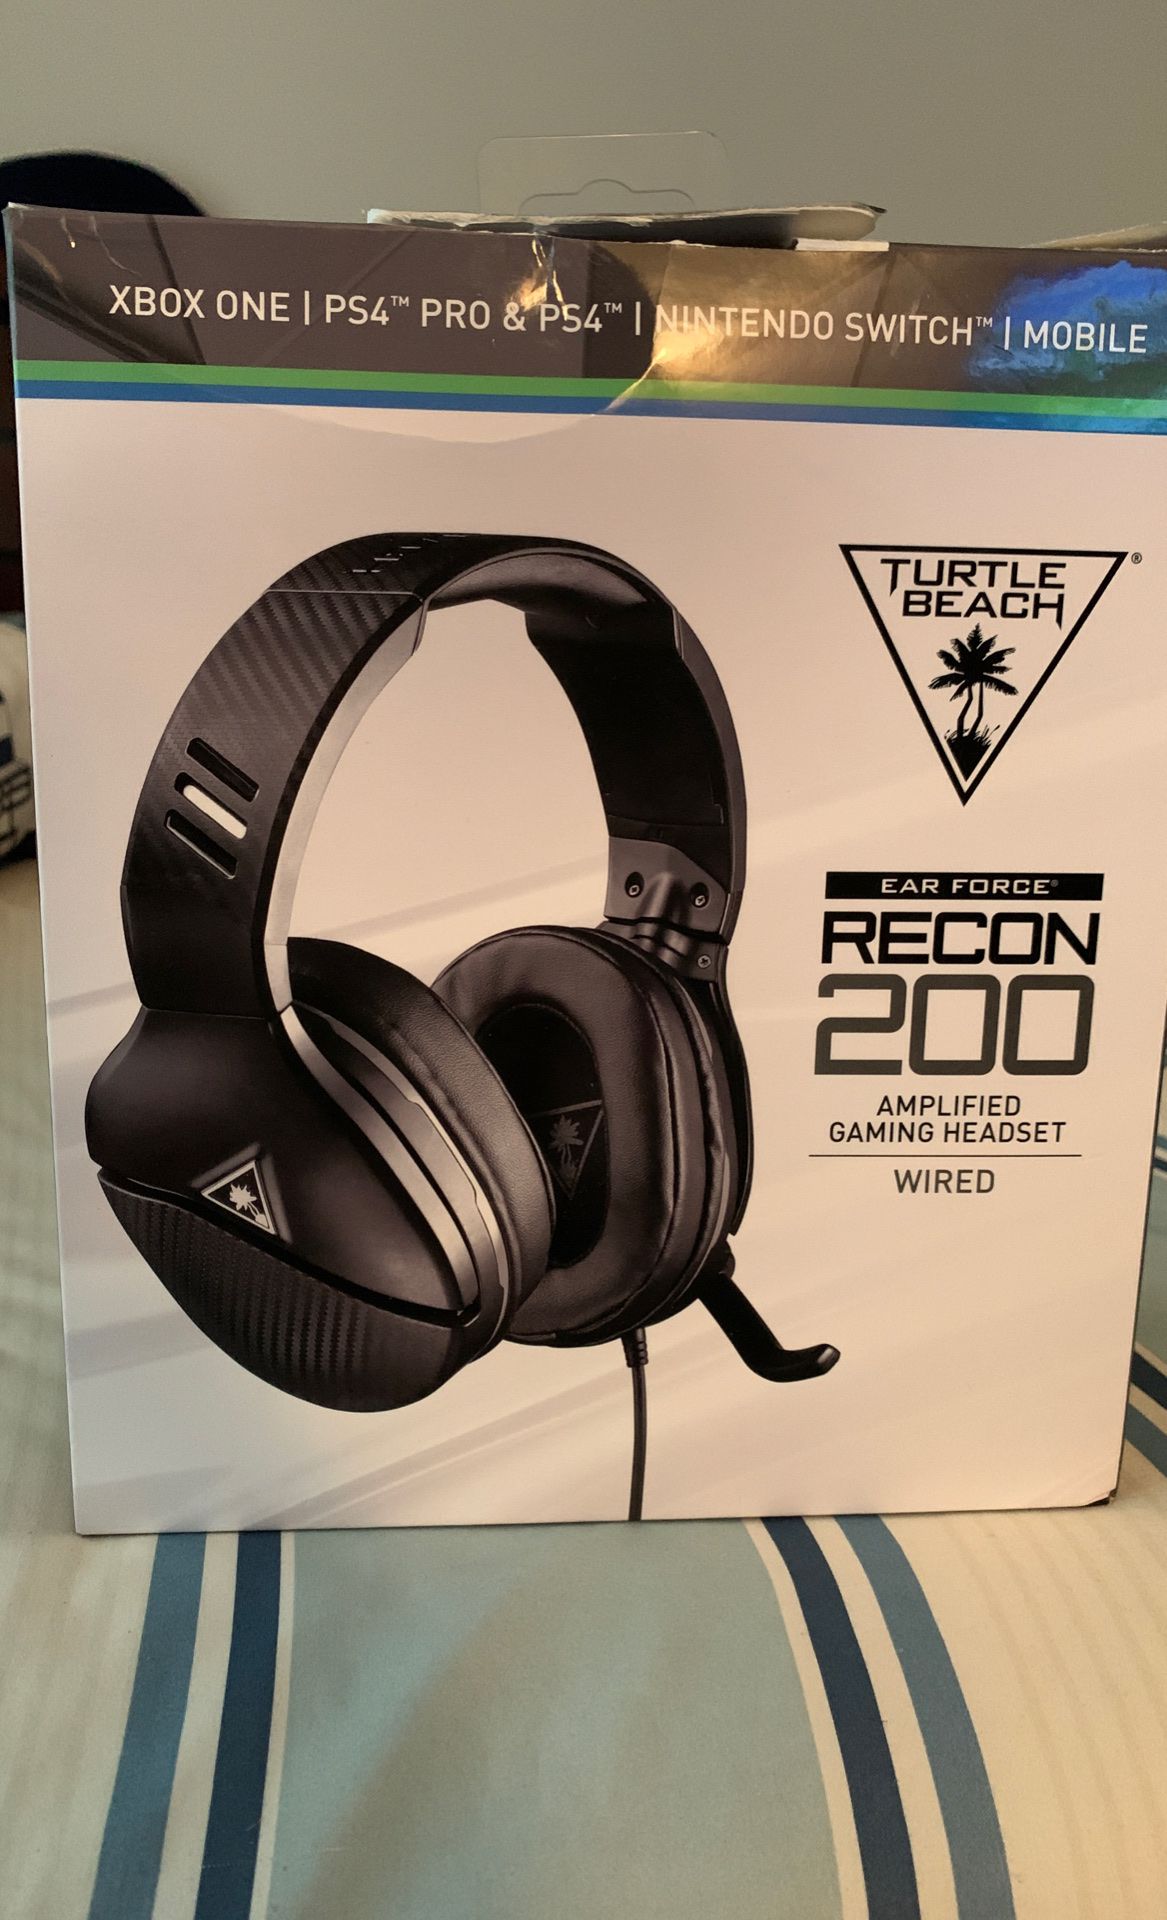 Turtle beach Recon 200 gaming headset